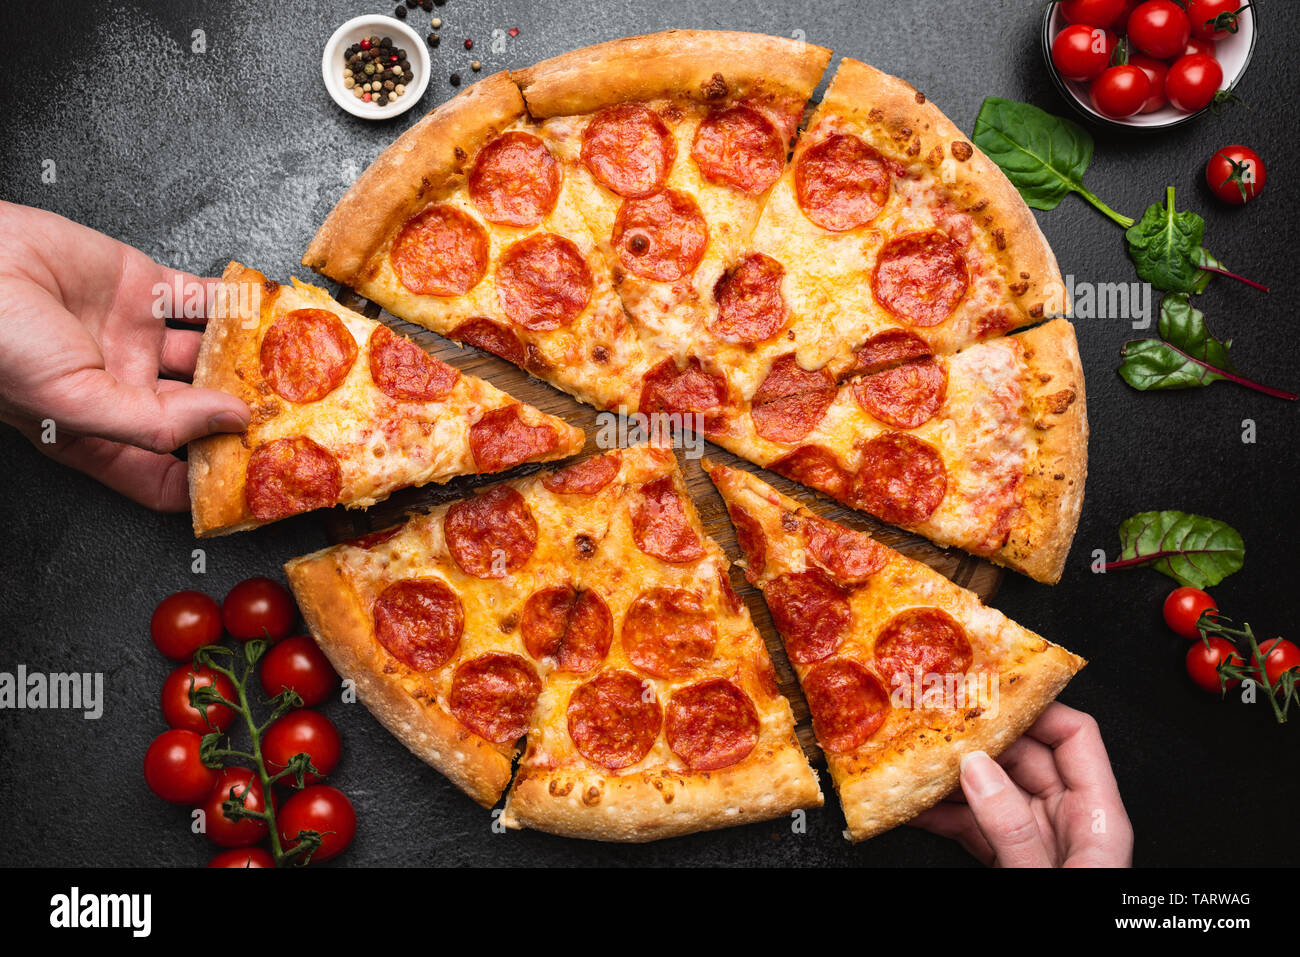 Pepperoni pizza on black concrete background top view. People taking slice of pizza. Party food, unhealthy eating concept Stock Photo